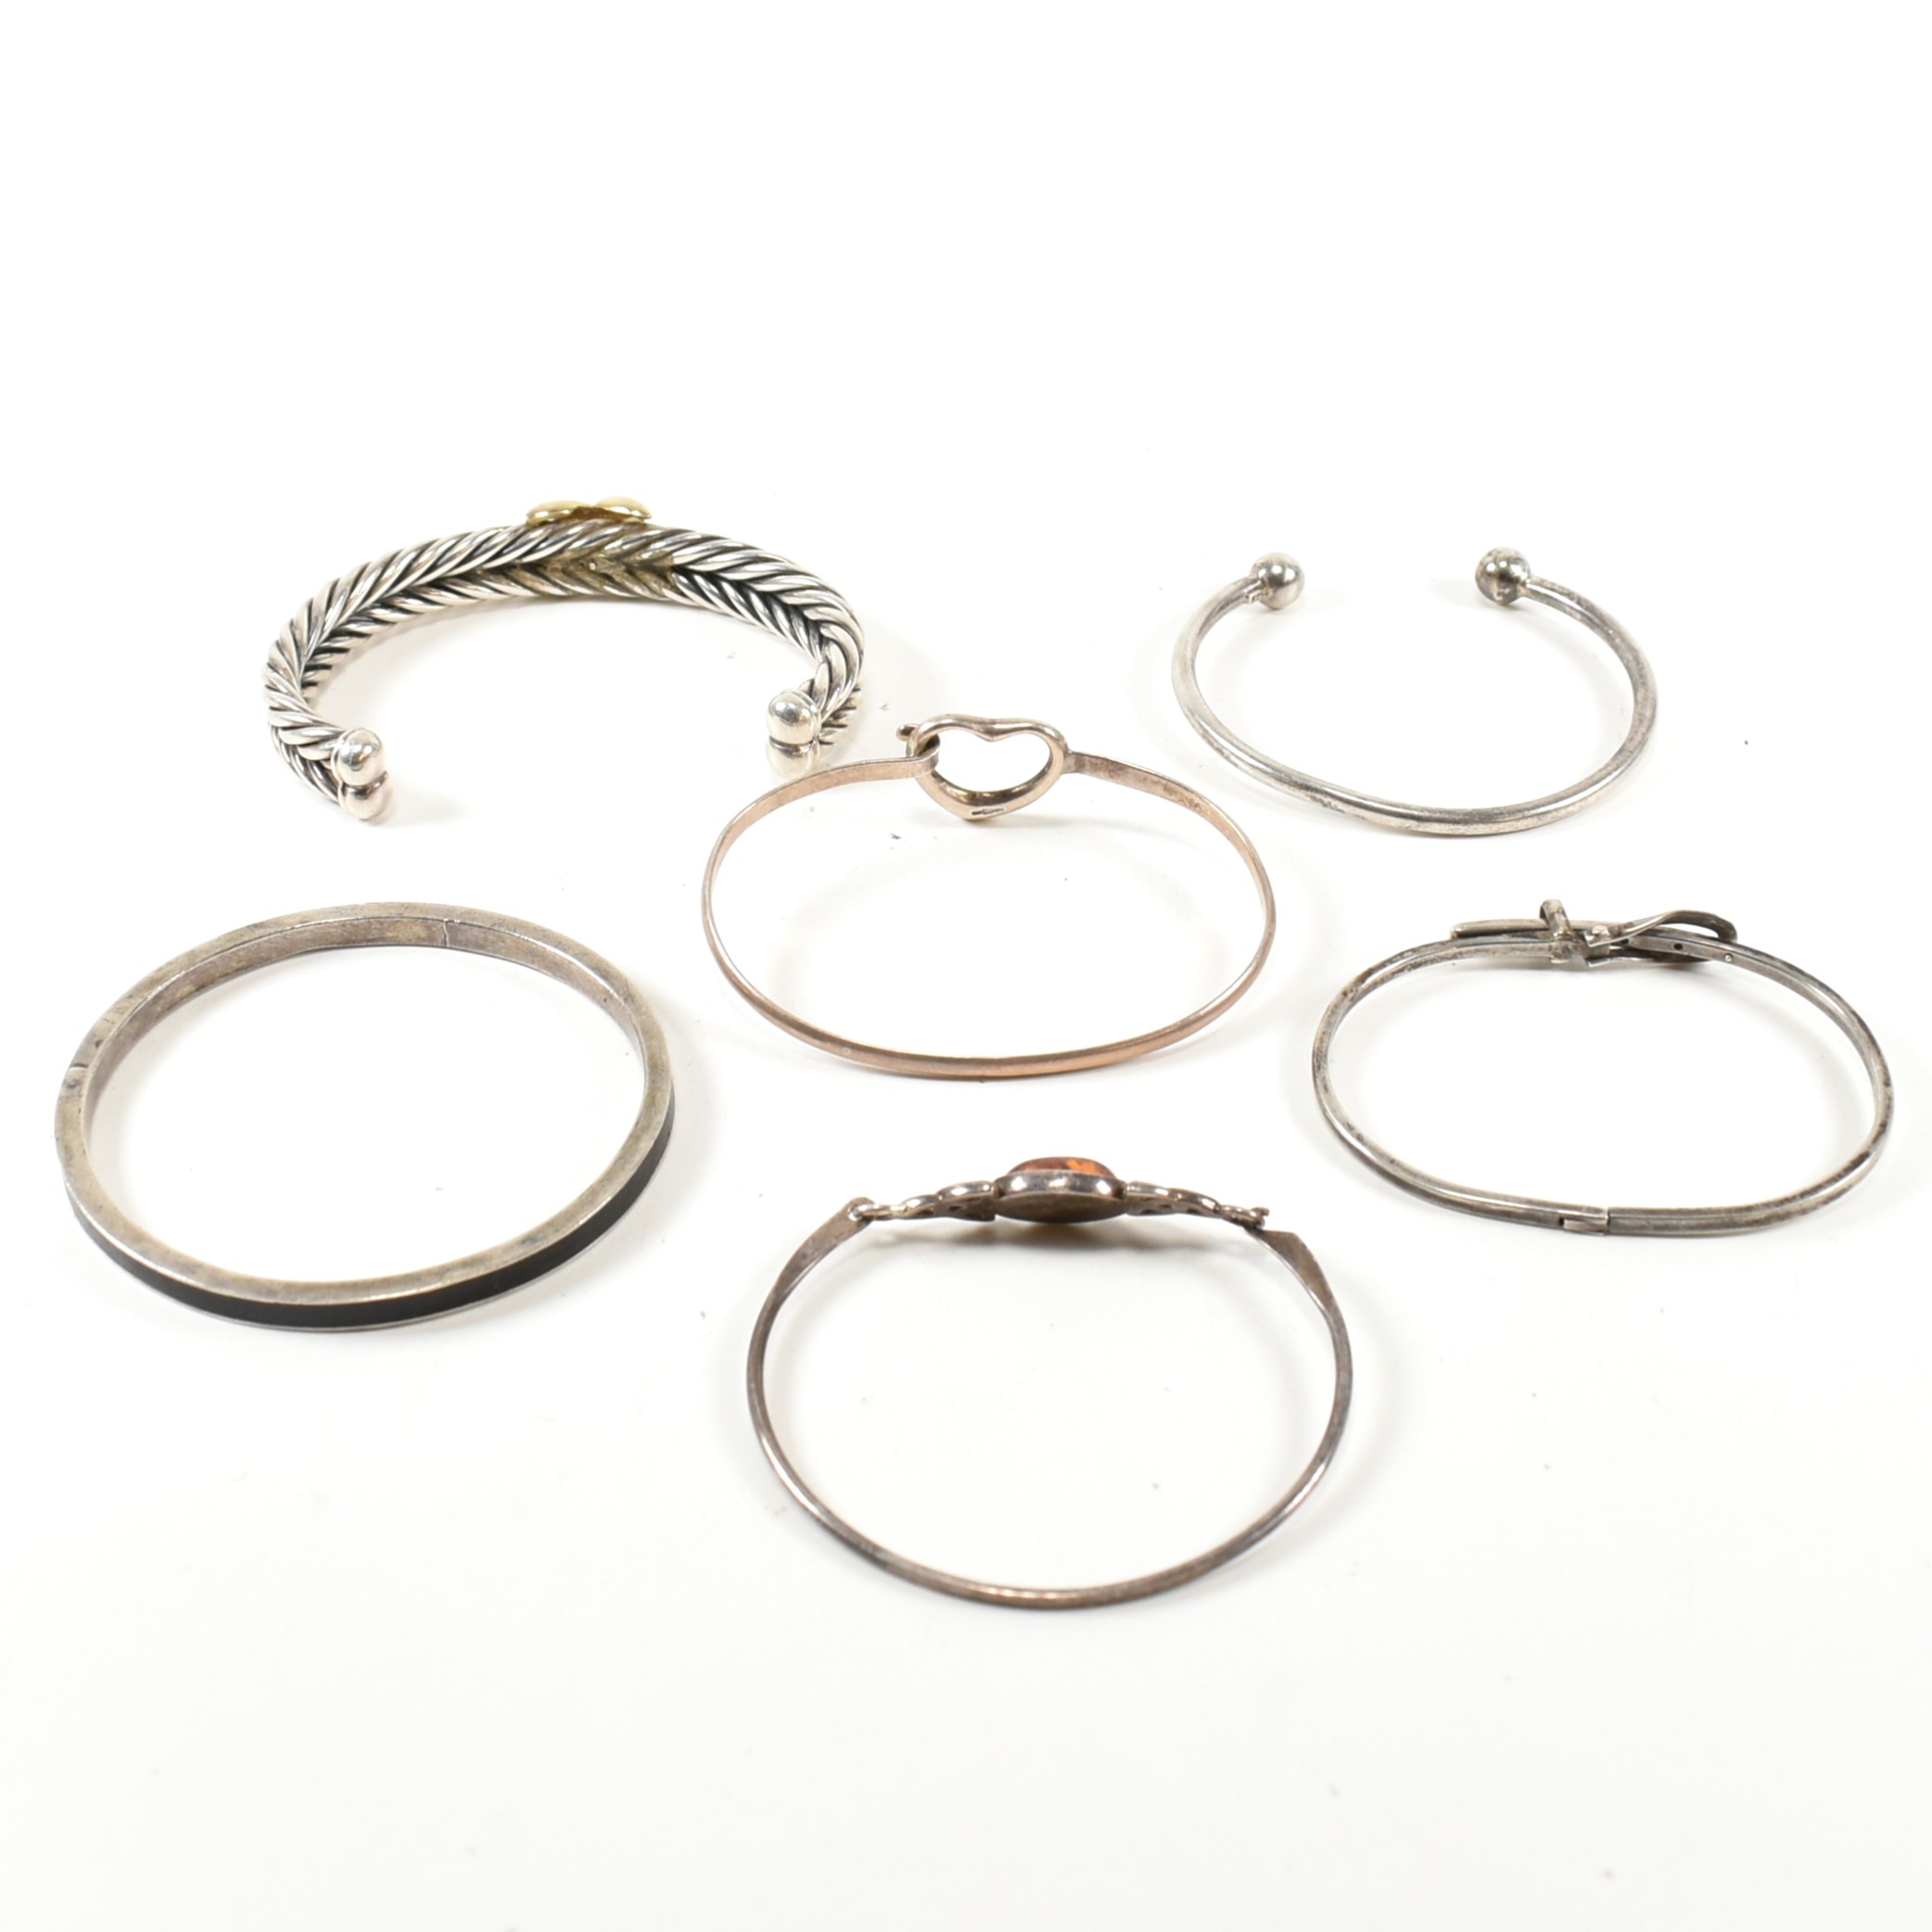 COLLECTION OF SILVER BANGLES & BRACELETS - Image 2 of 6